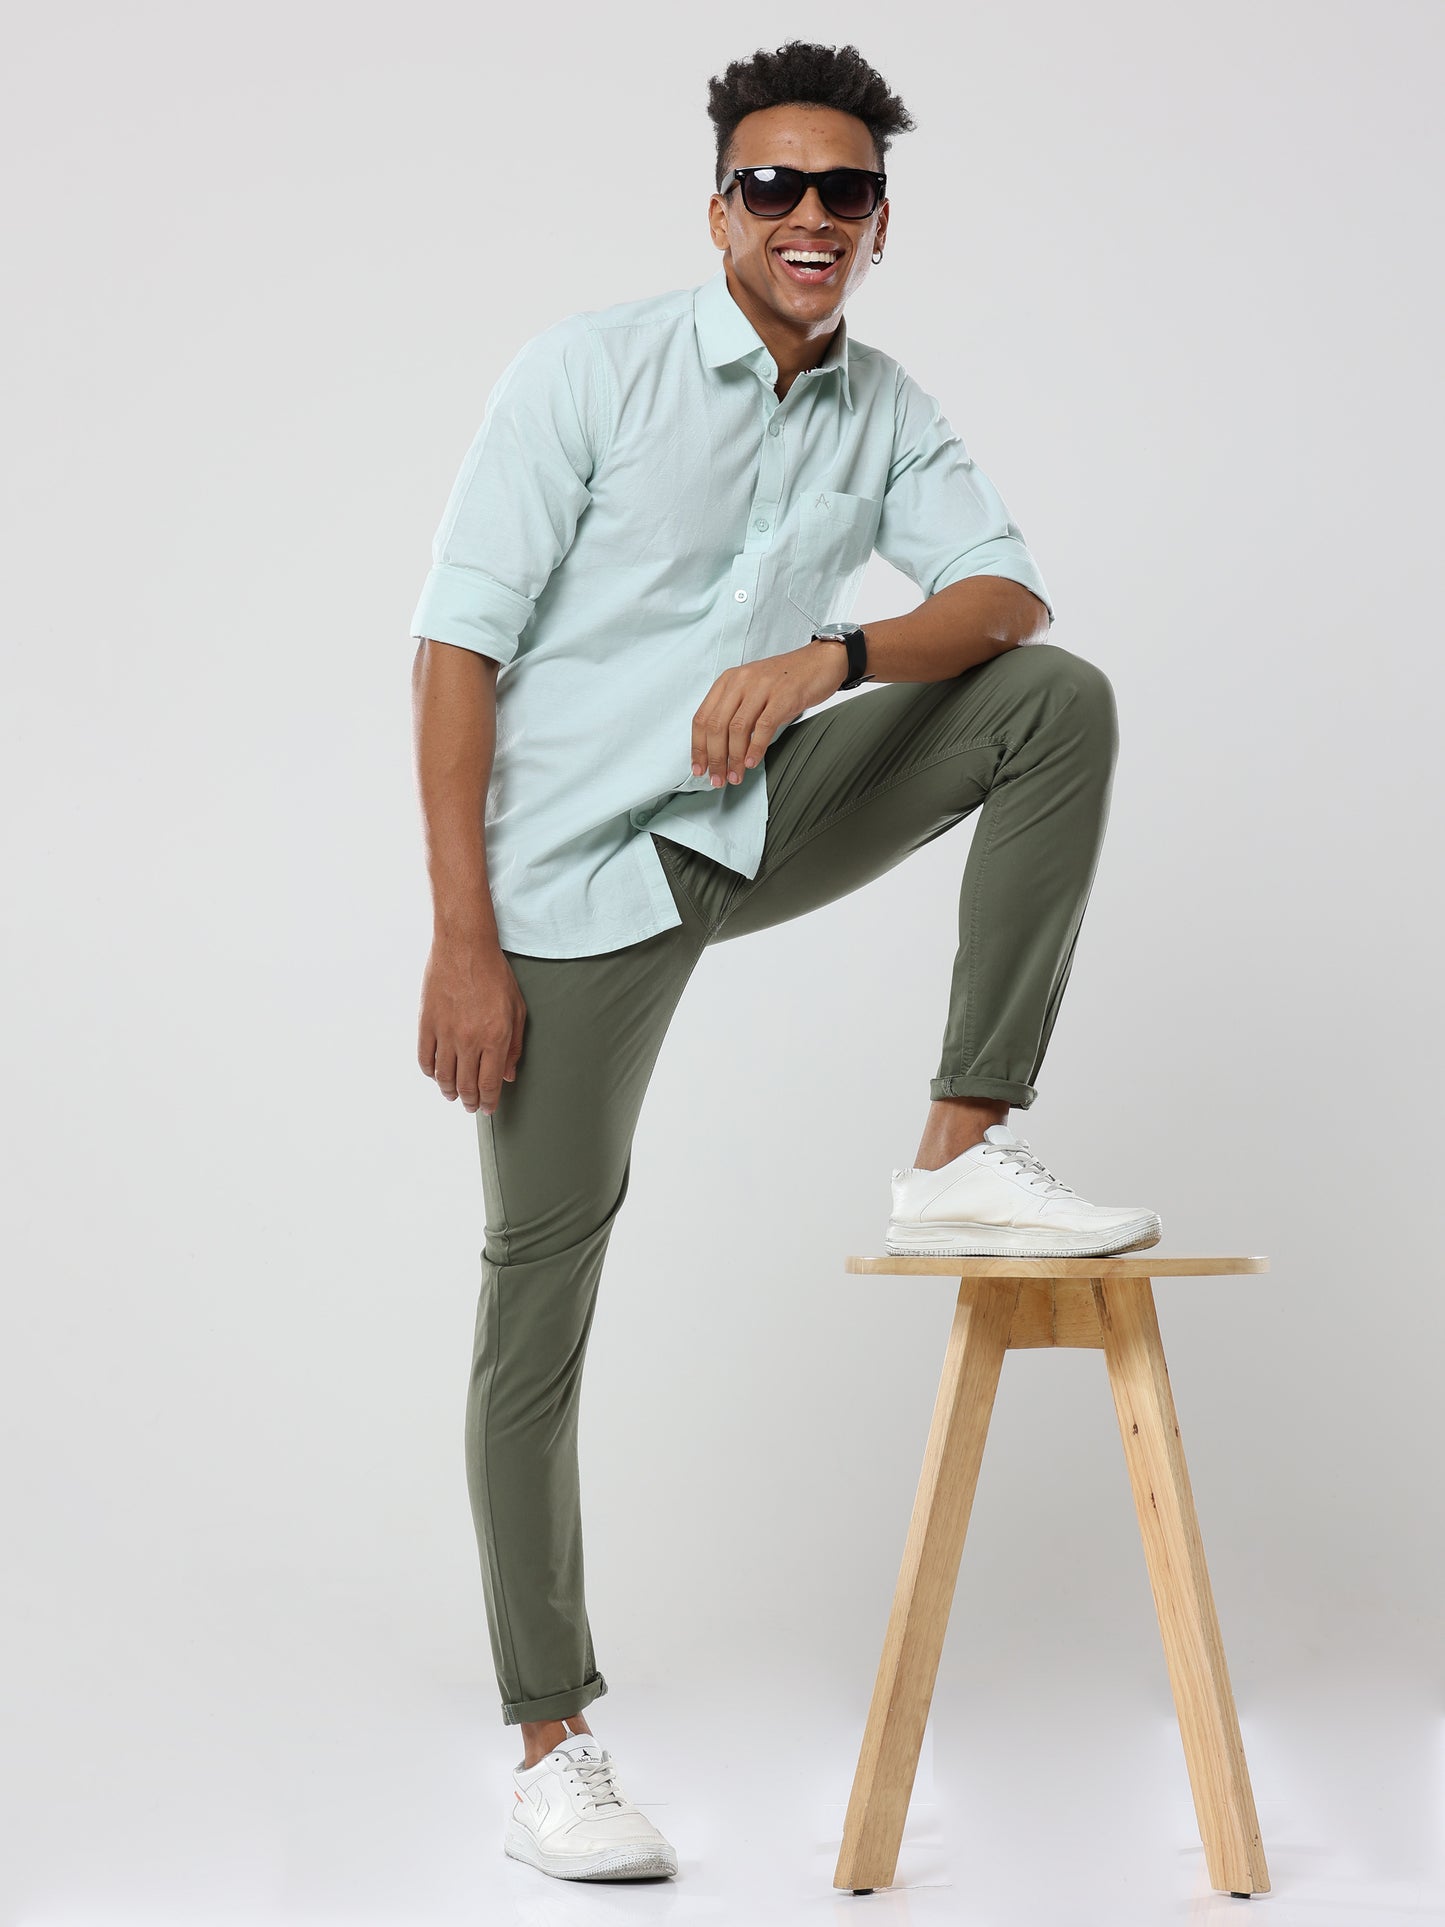 Albatross Plain classic Olive Green chinos for mens